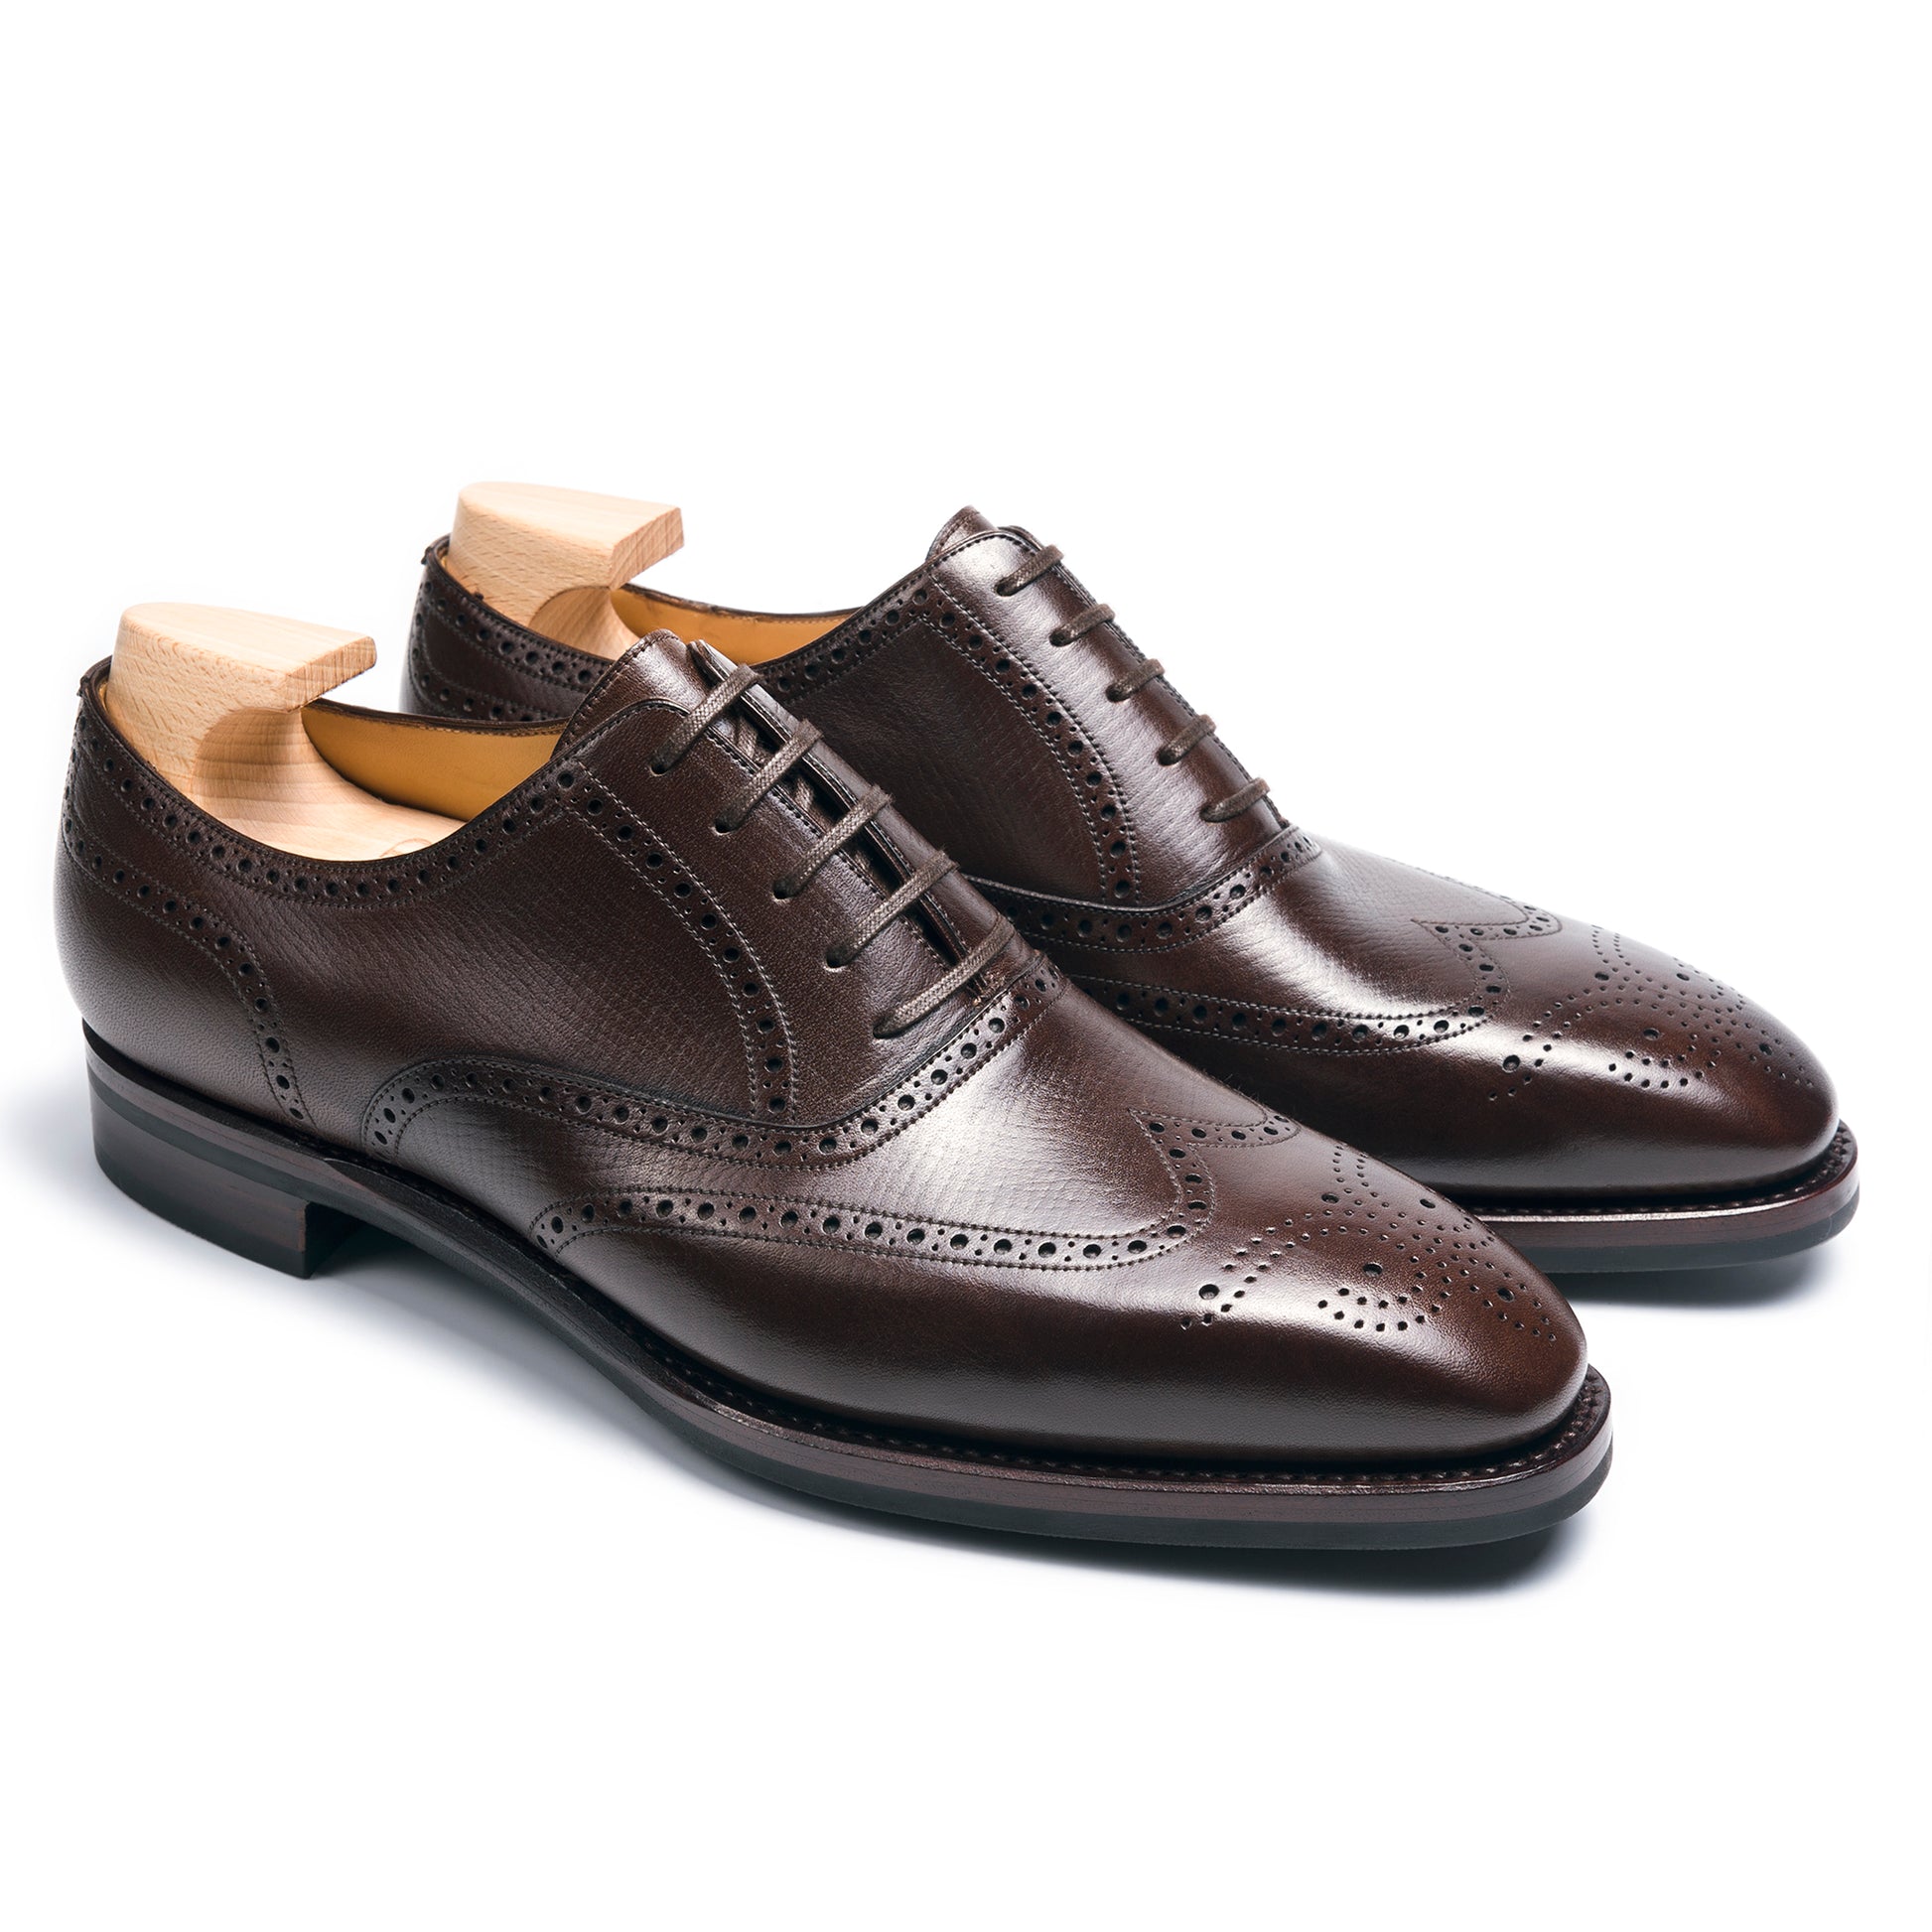 TLB Mallorca leather shoes 110 / PICASSO / HATCH GRAIN DARK BROWN